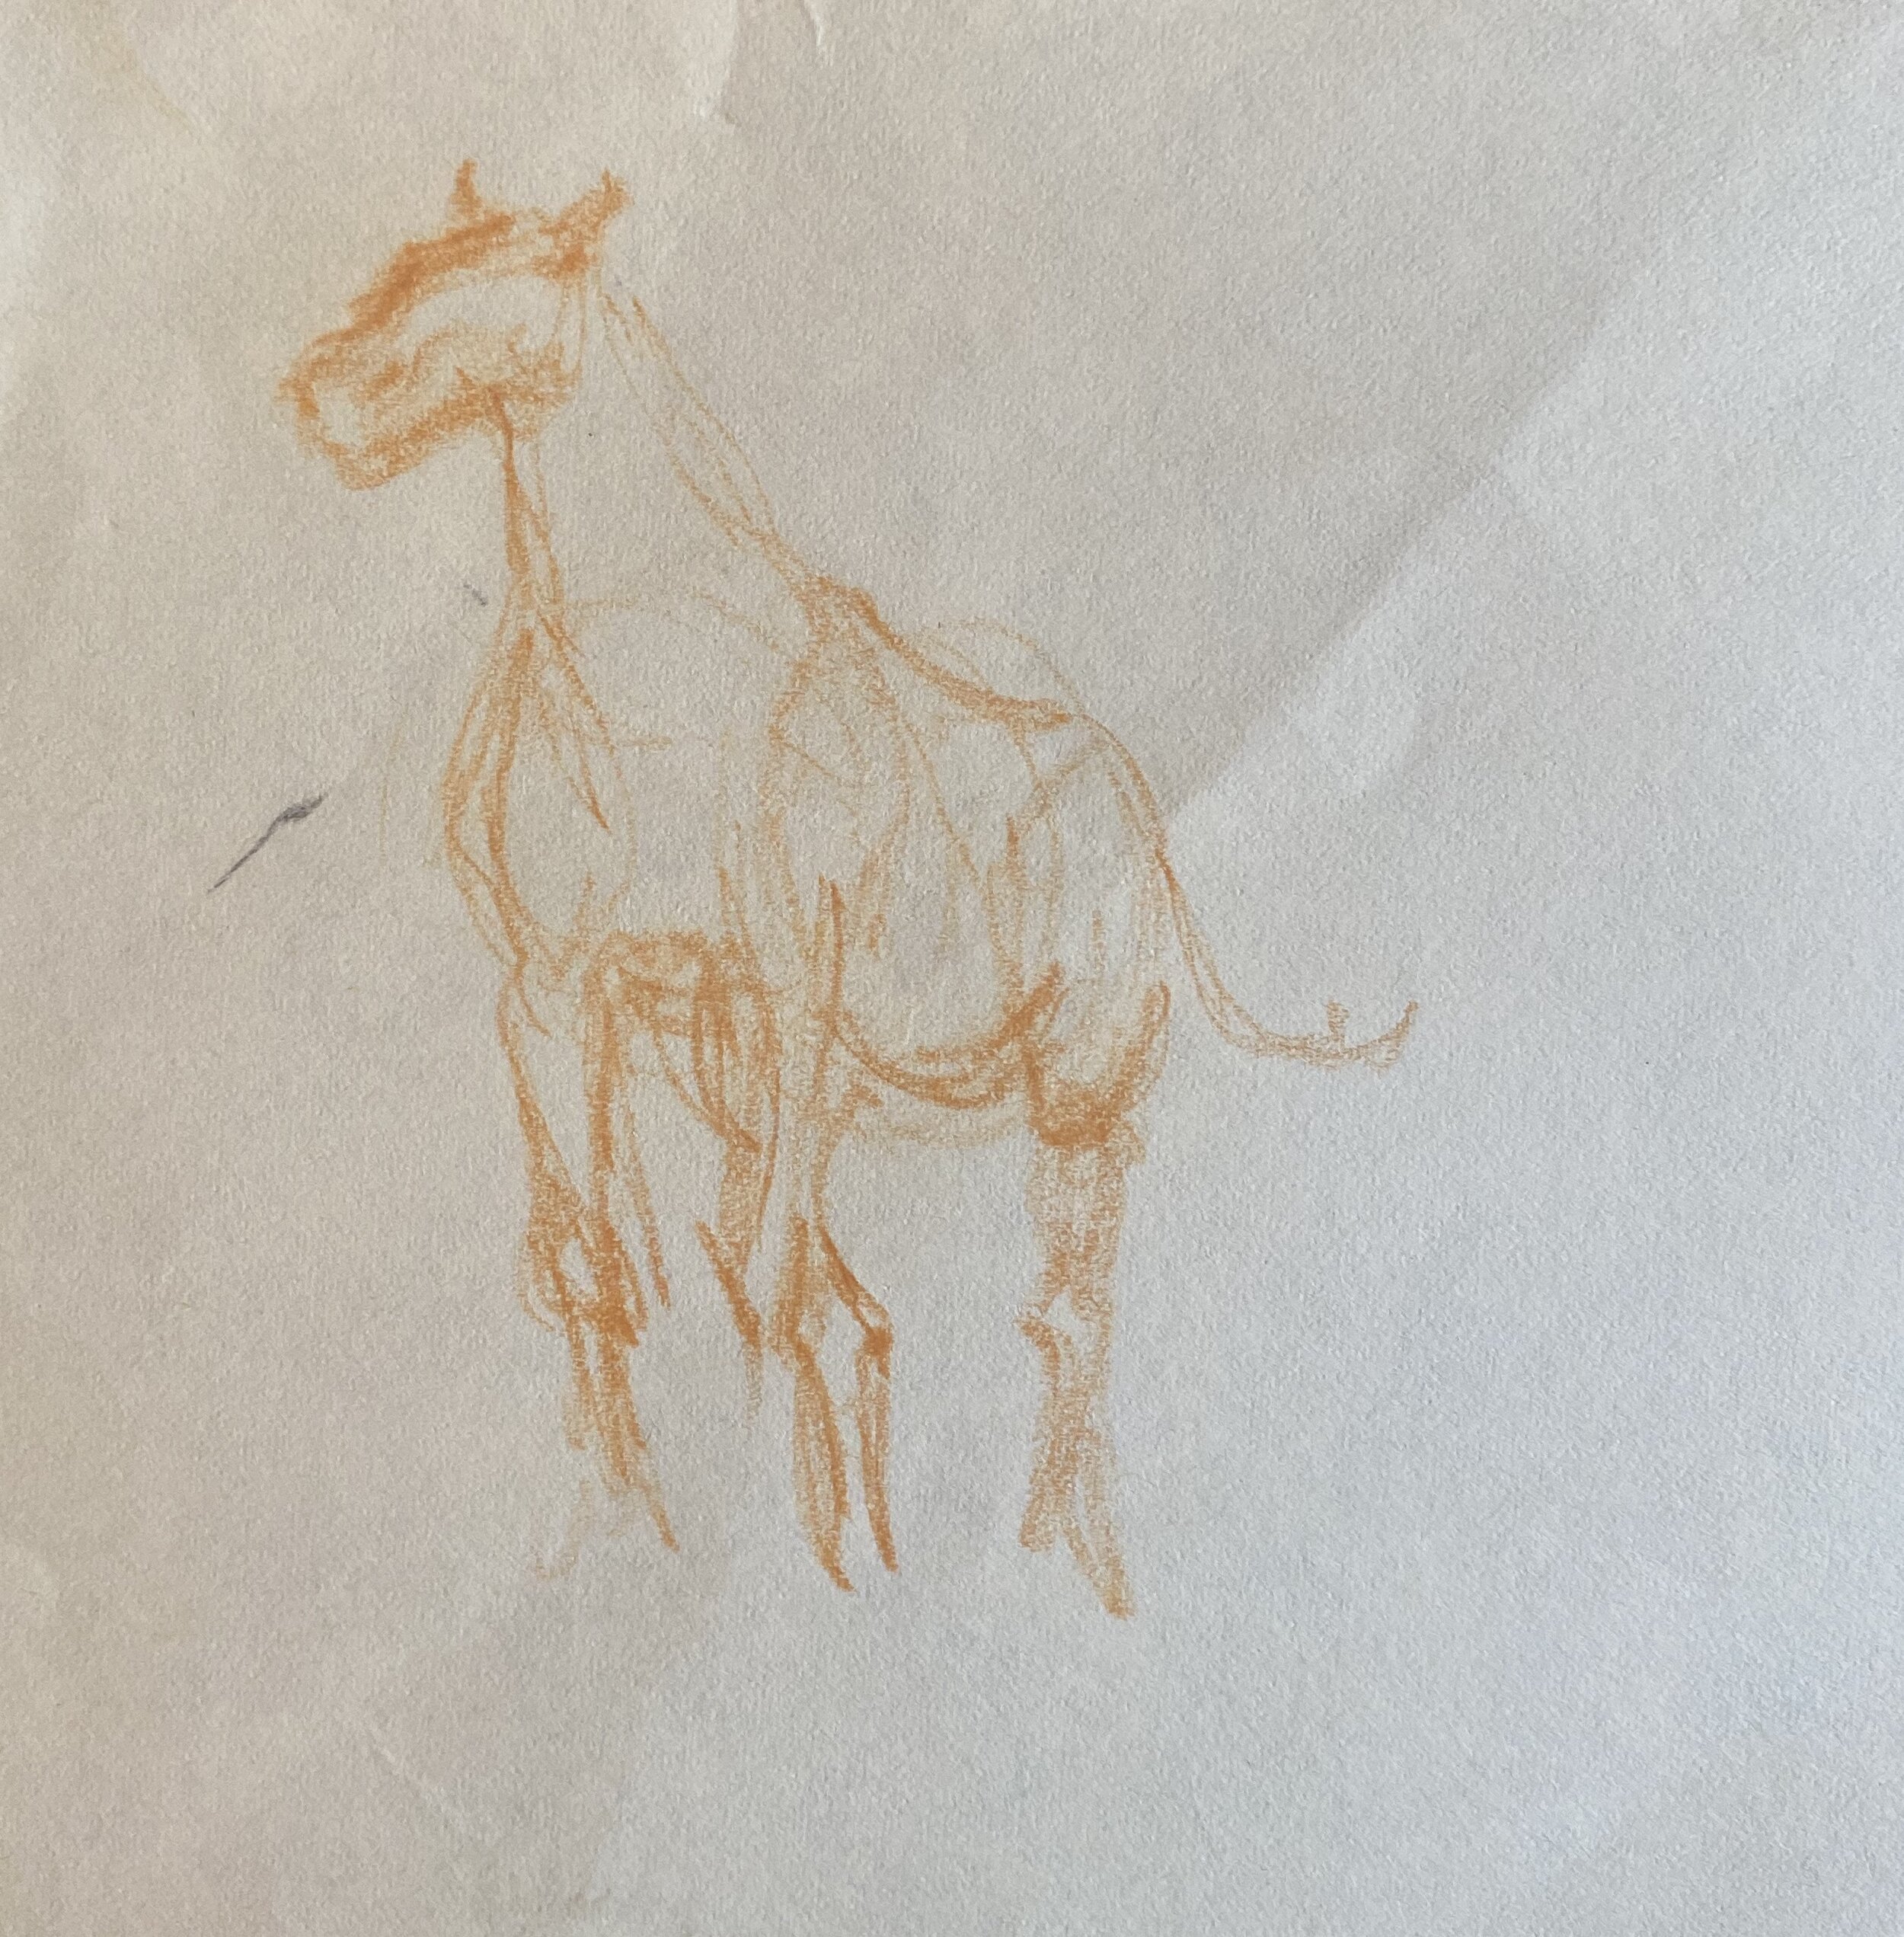   Description:  Horse sketch (unfinished)   Medium:  Pastel pencil on paper   Dimensions:   H: 5 in W: 5 in 